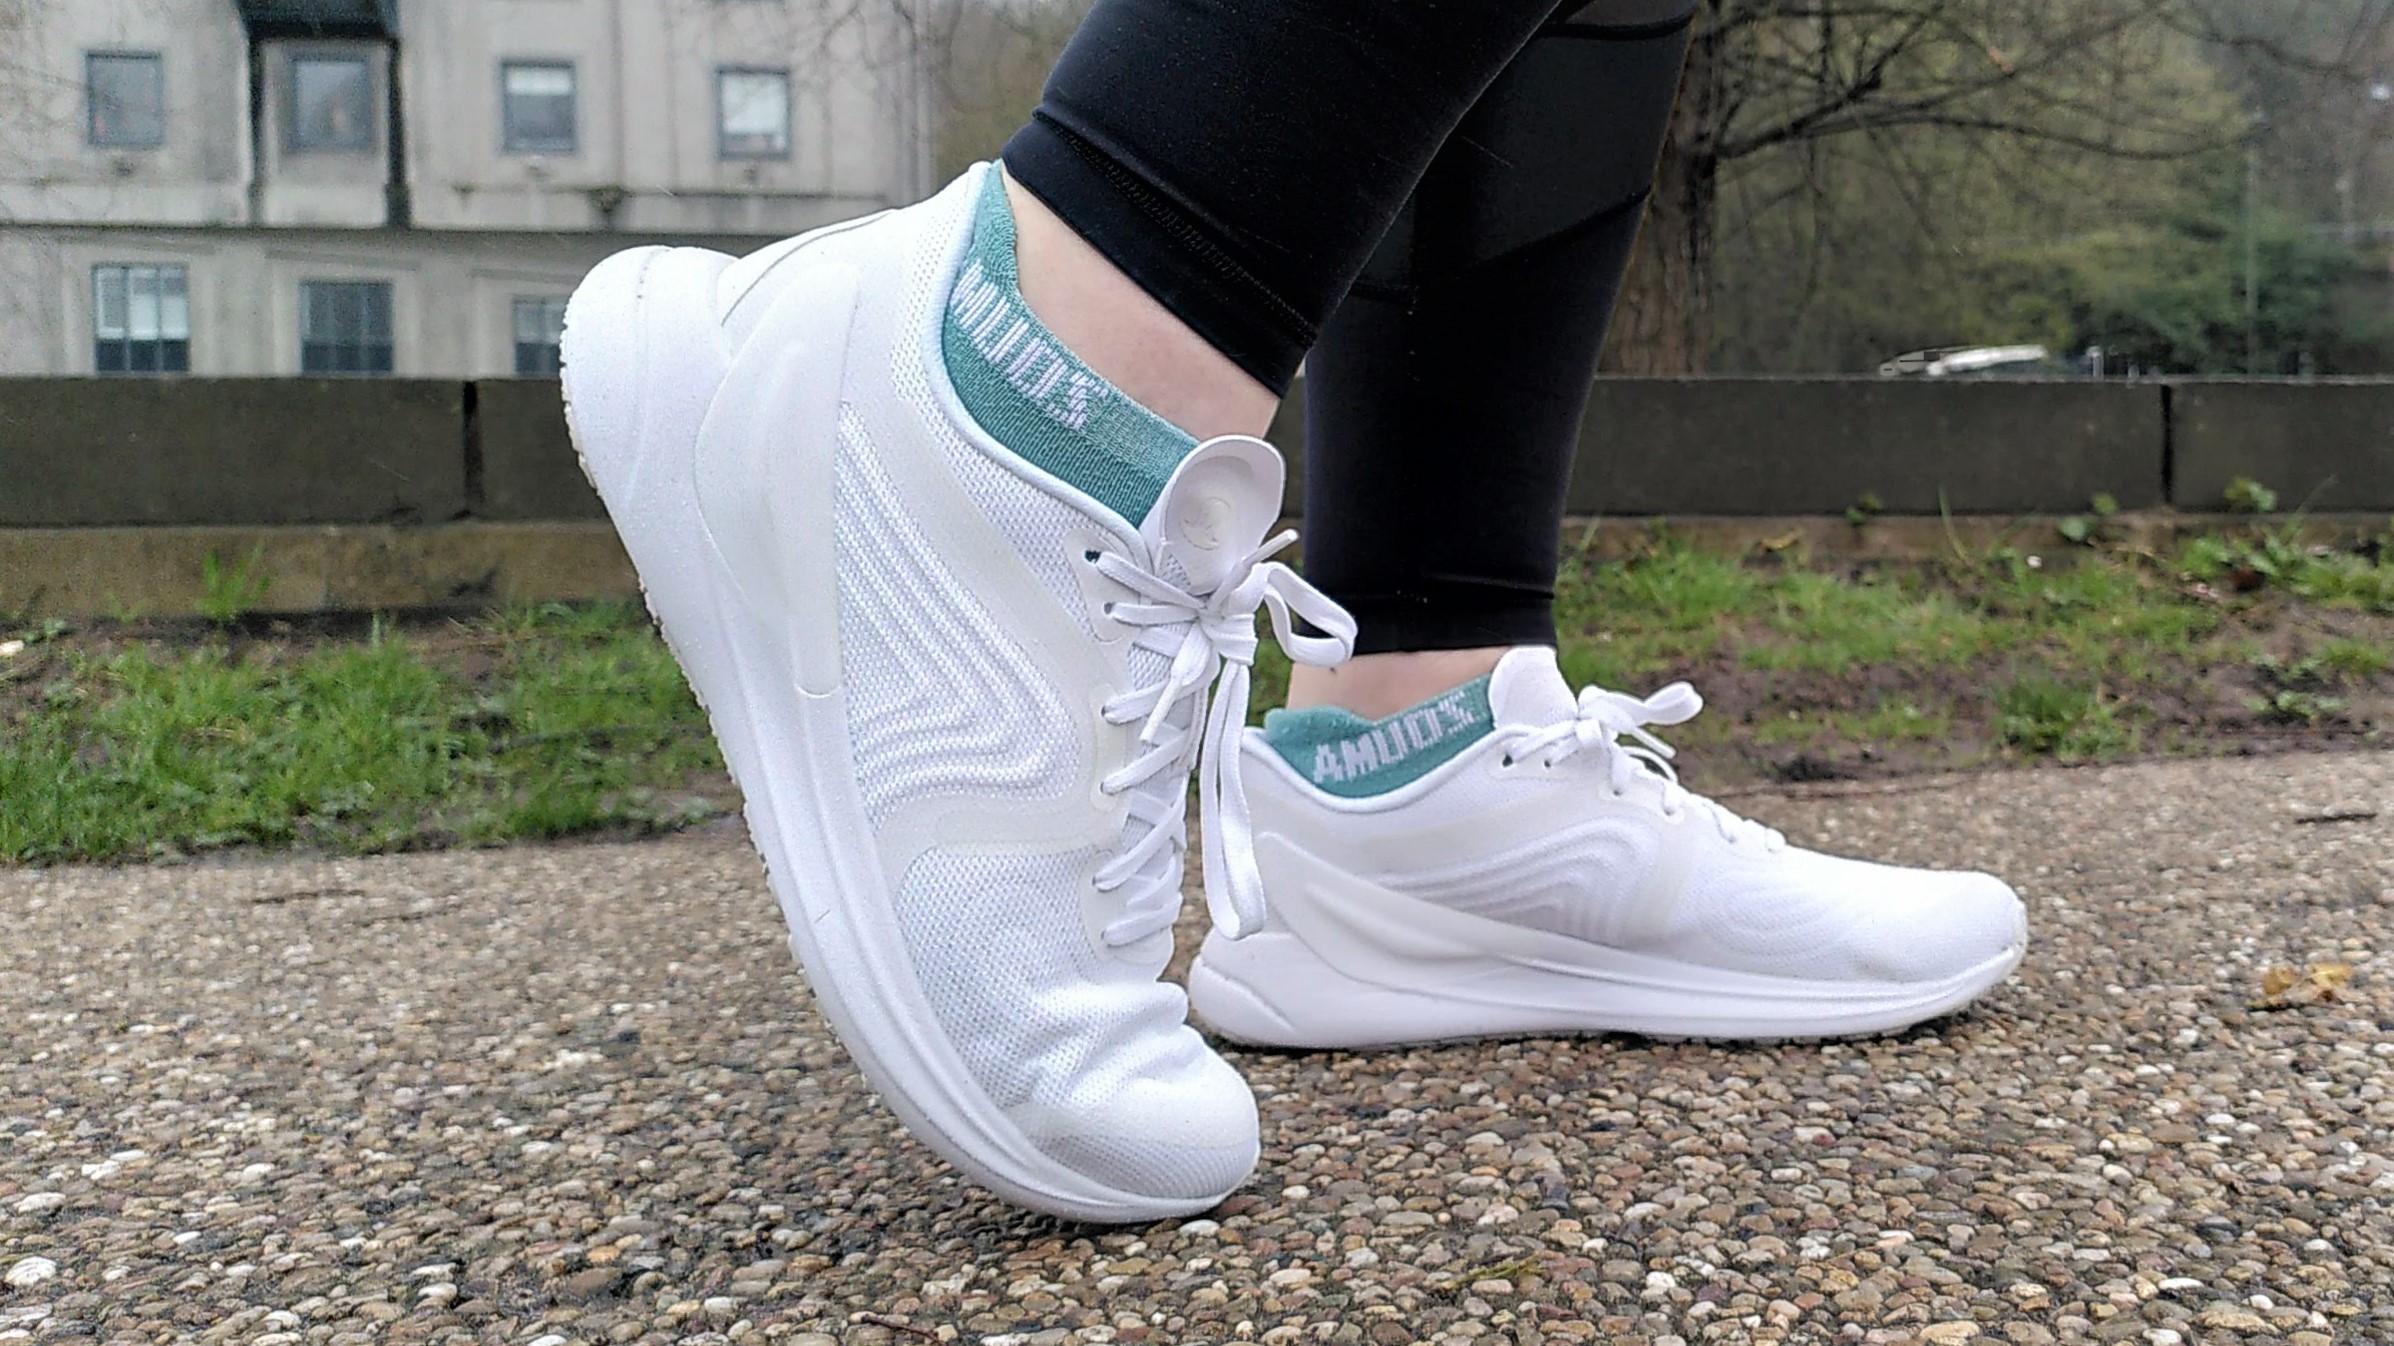 Lululemon Blissfeel 2 review: an everyday road shoe designed specifically  for women